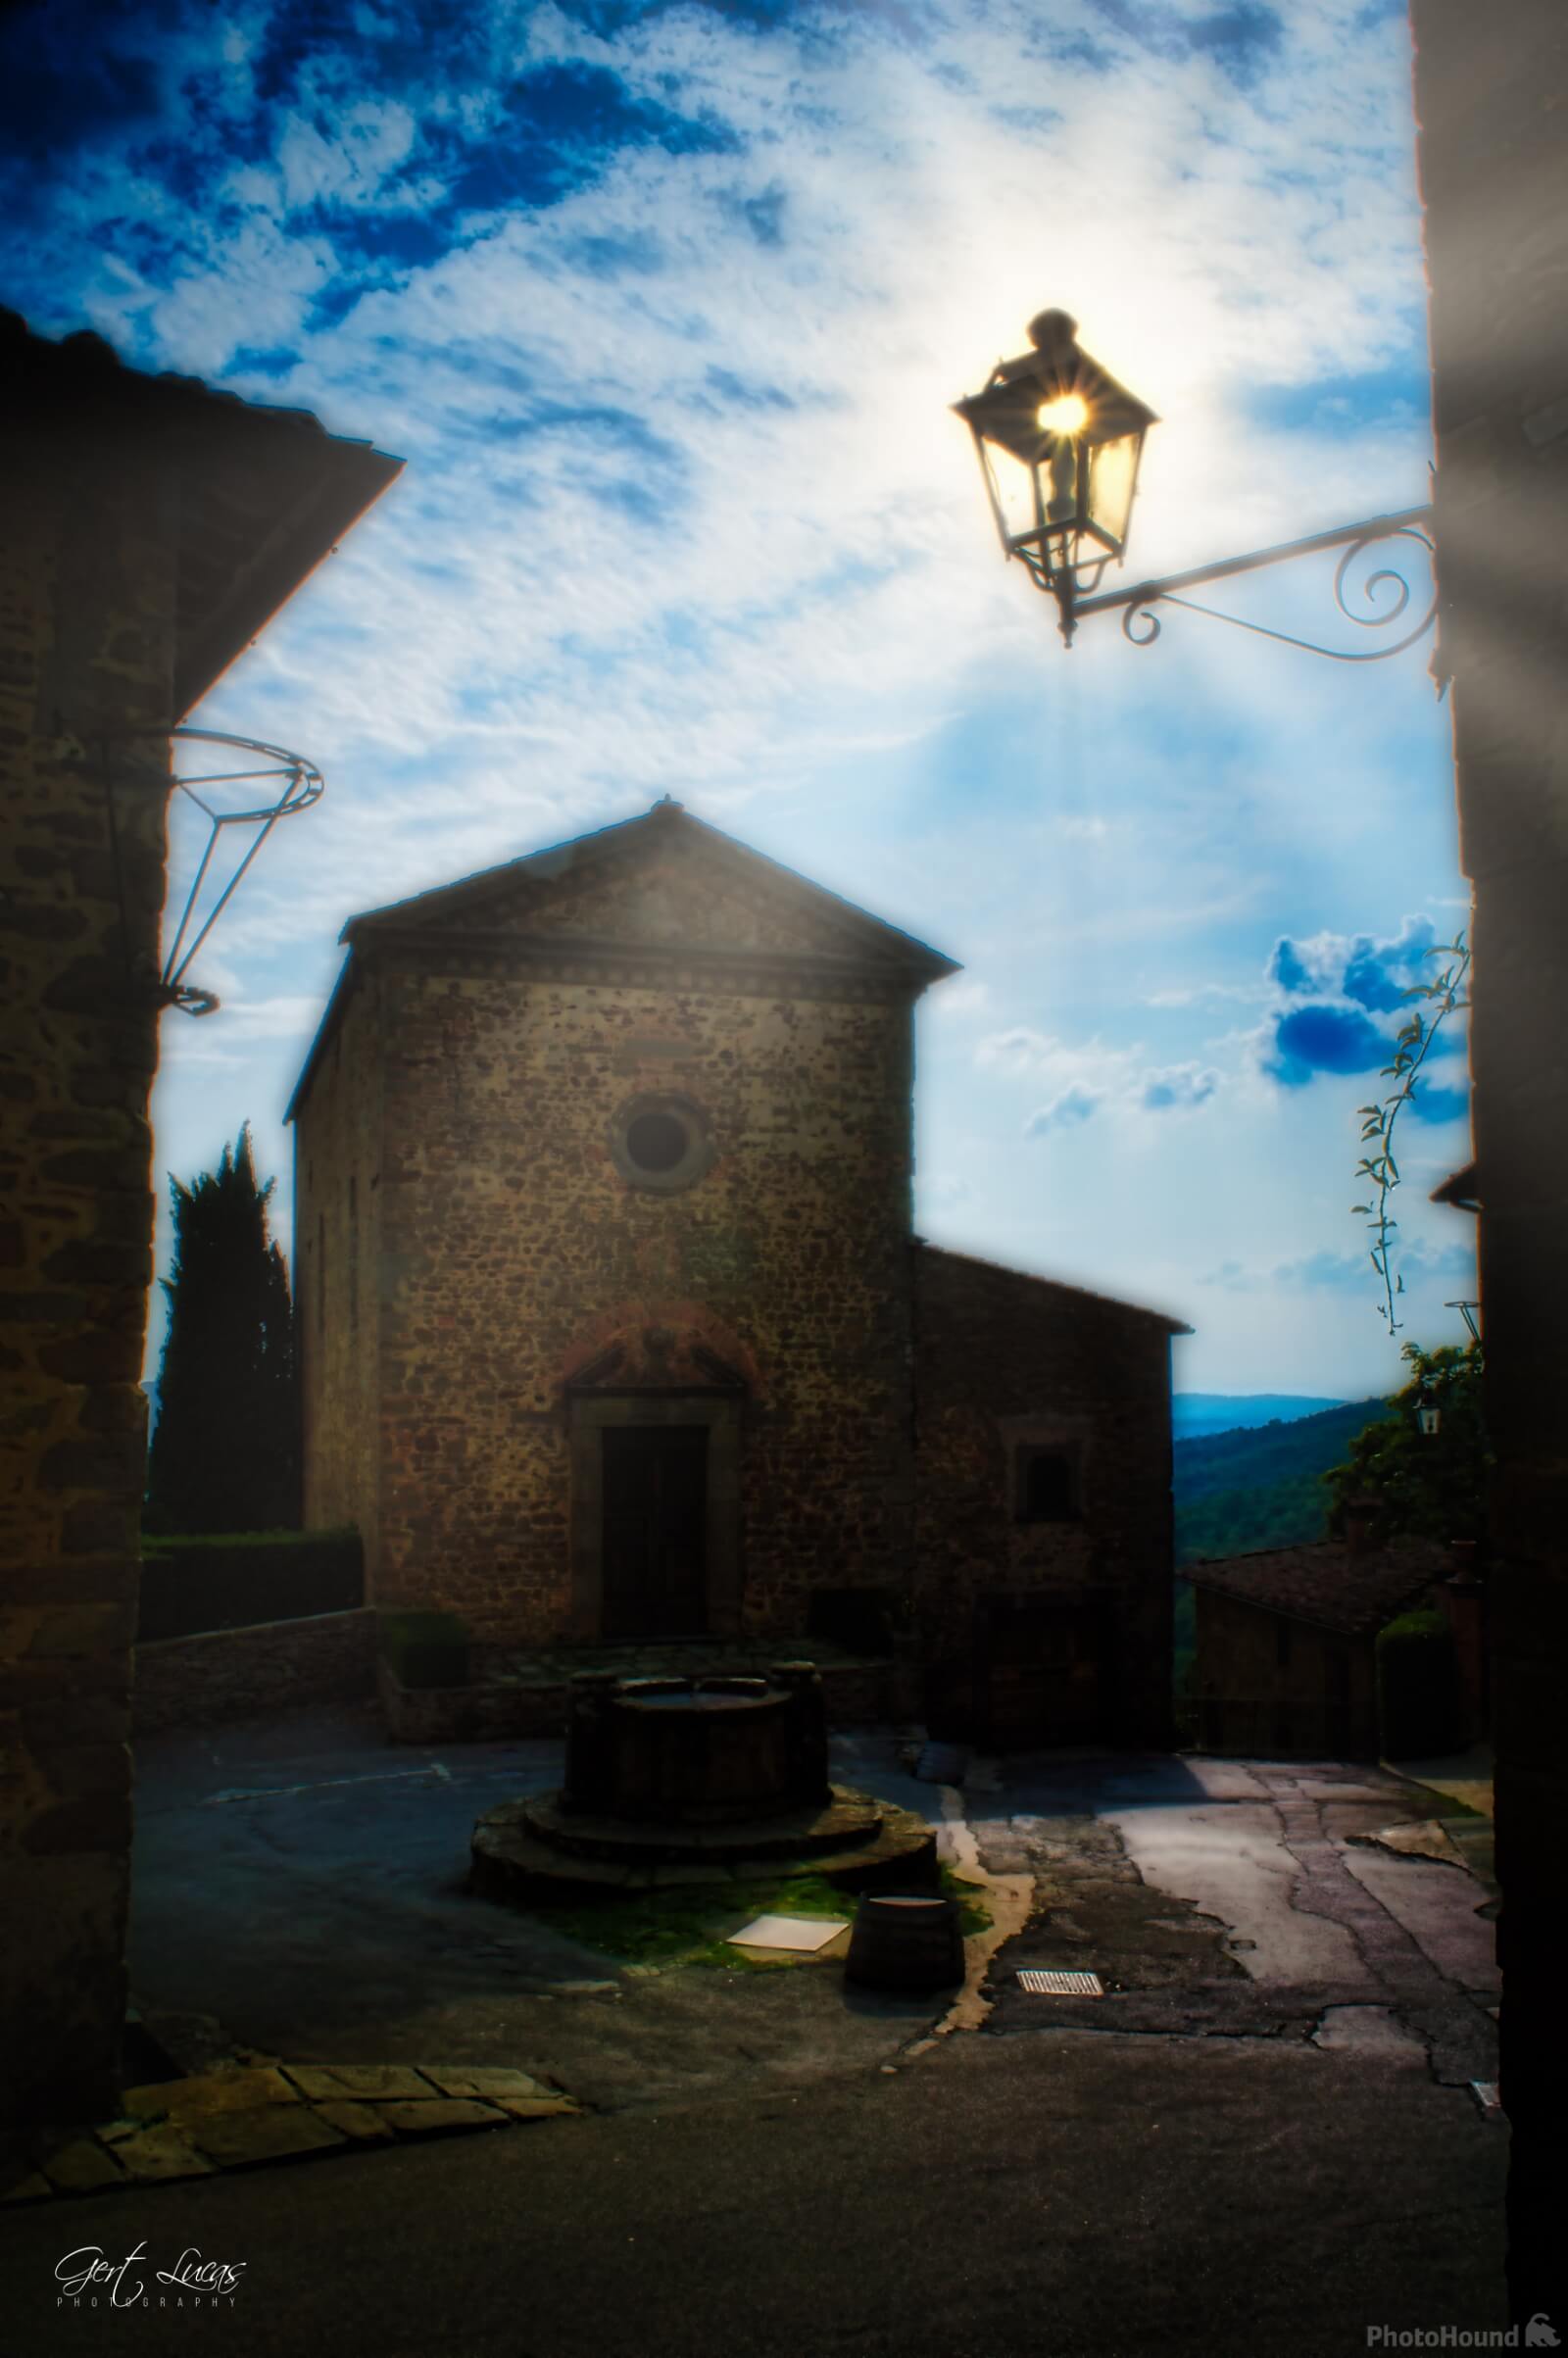 Image of Volpaia, Chianti by Gert Lucas